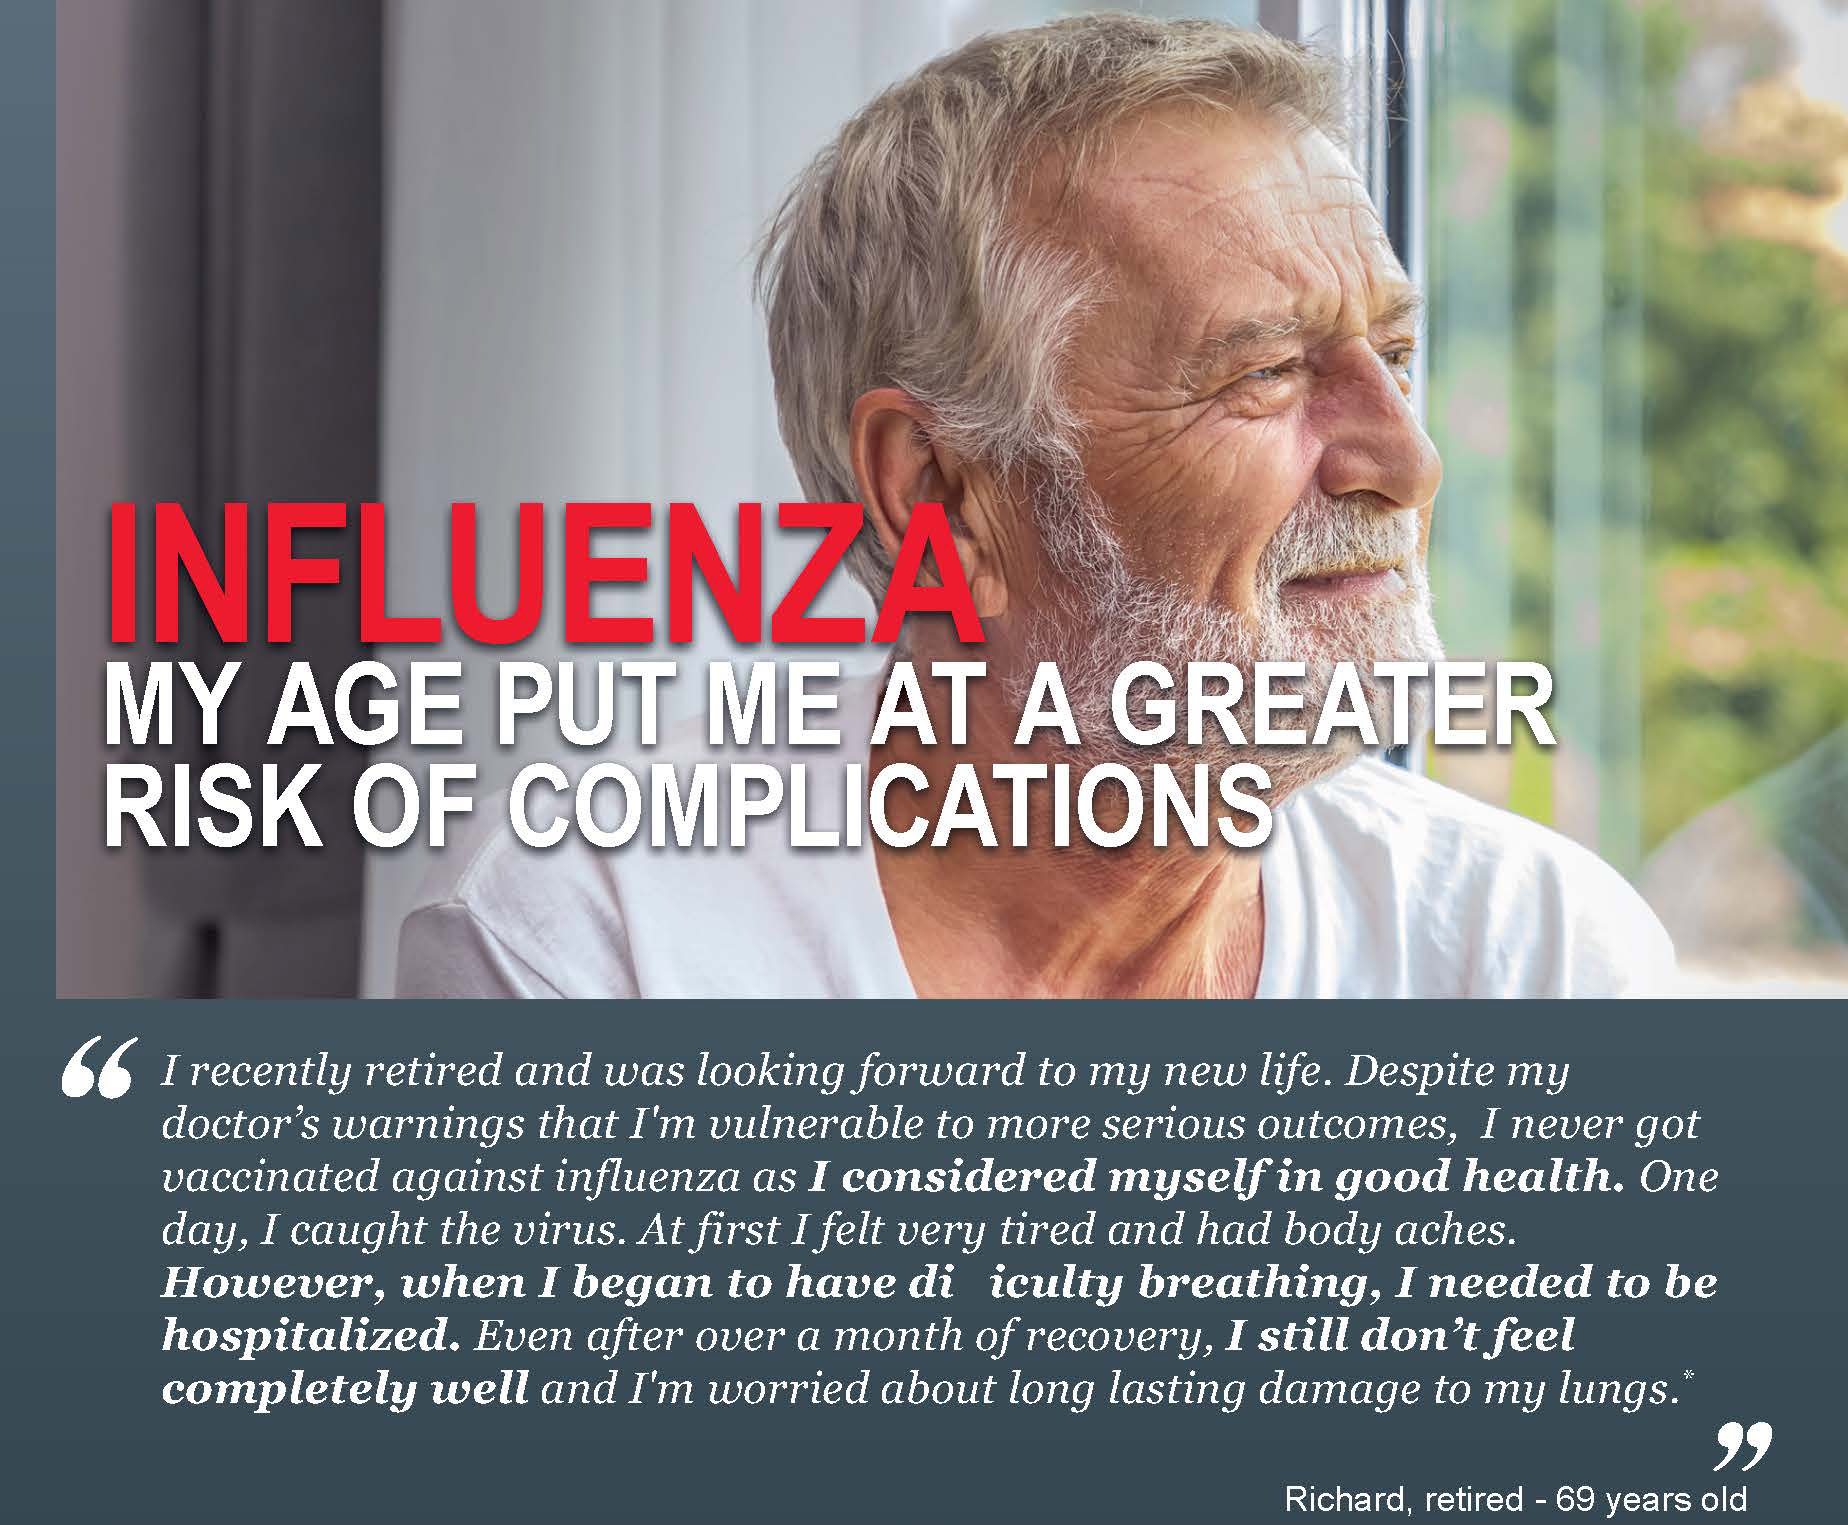 Influenza vaccine poster with image of thoughtful older man. Words are about age and greater risk of complications from influenza.